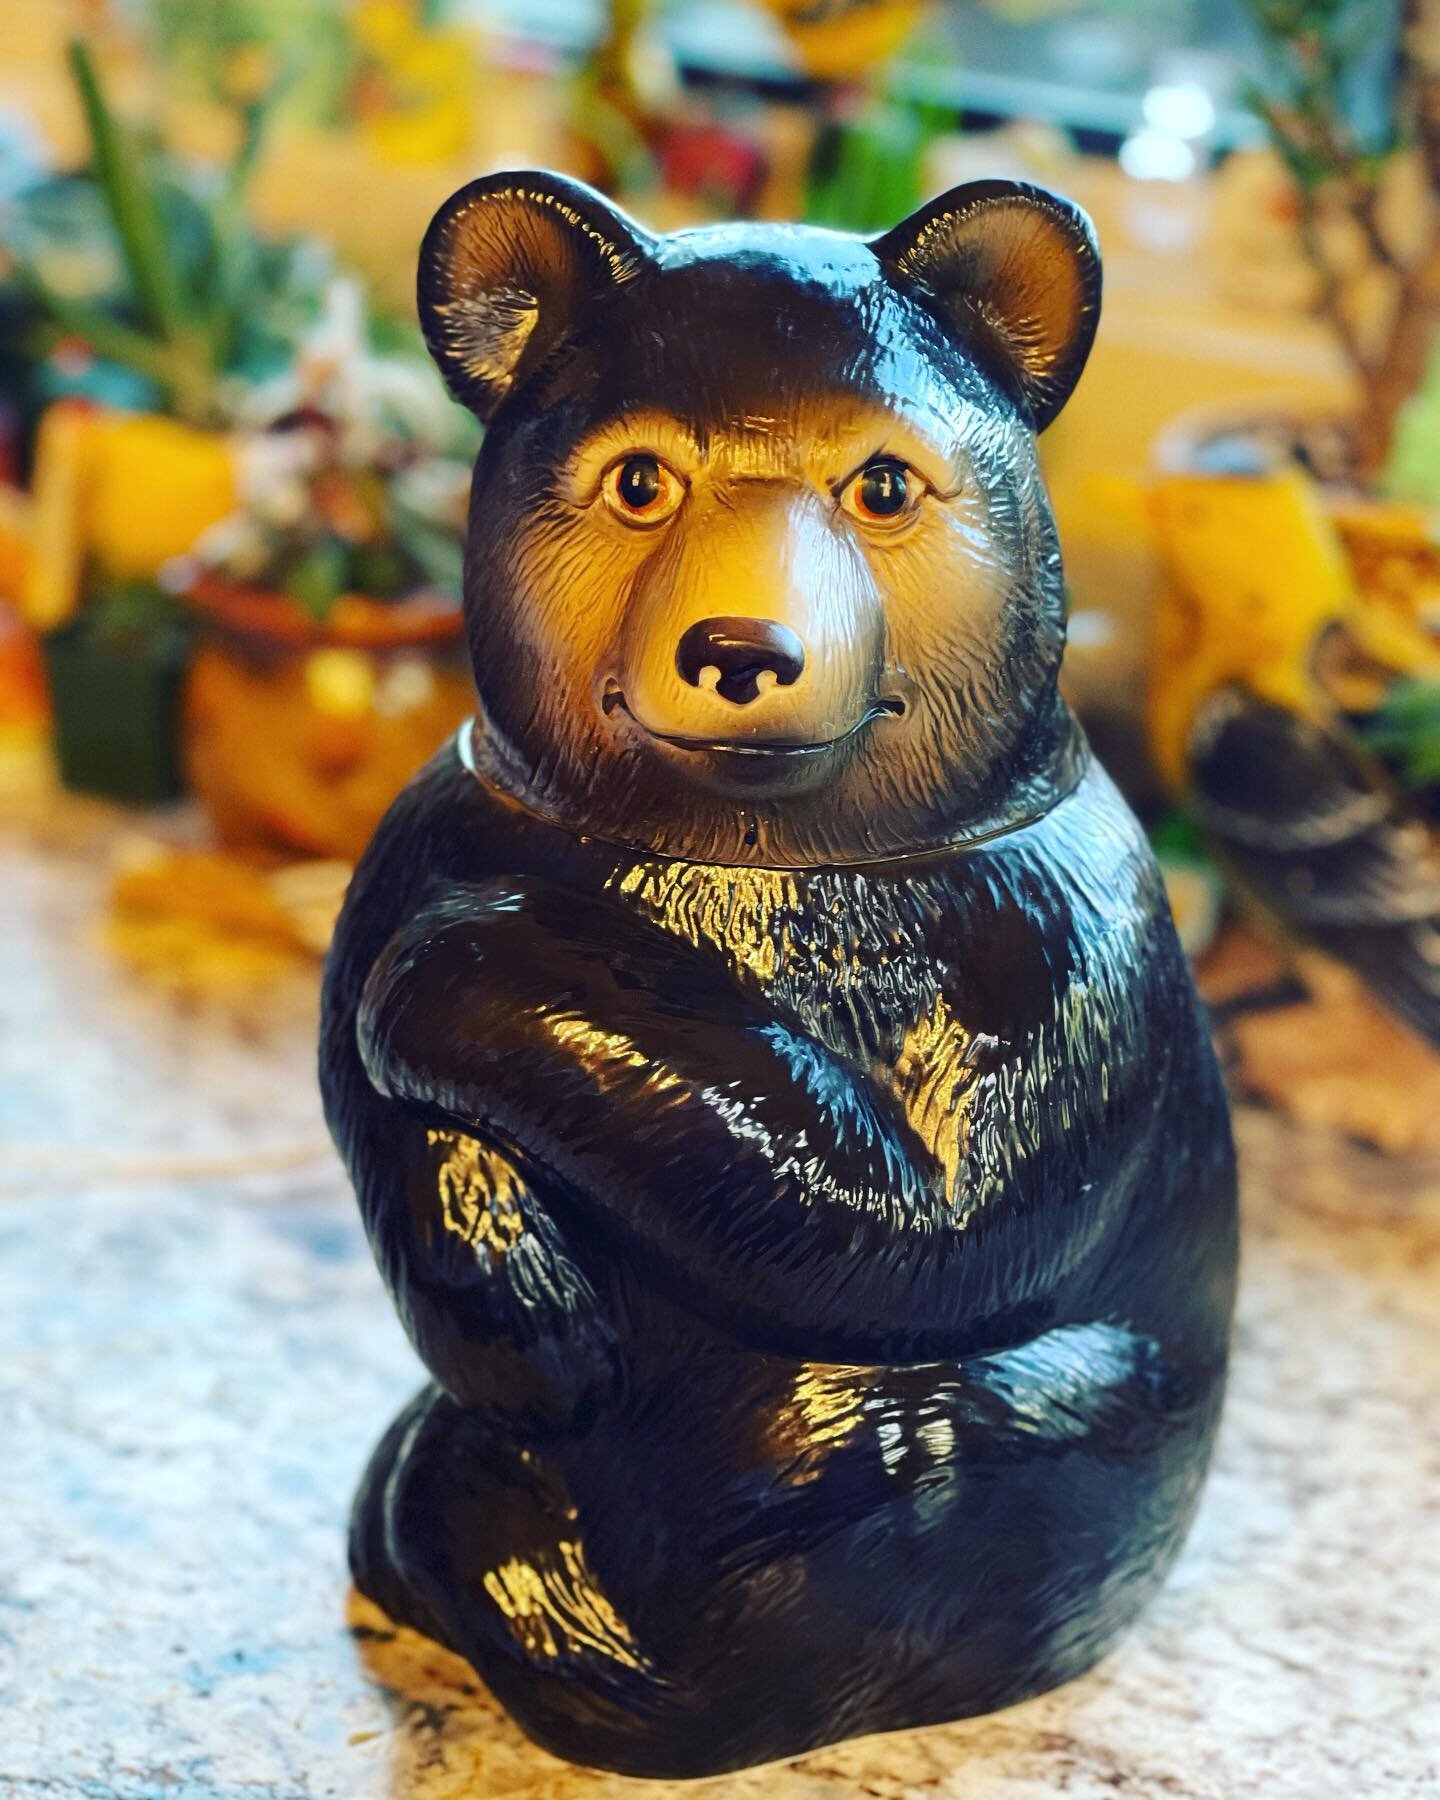 He found me in Indiana over Thanksgiving. This is going to be quite the swanky bear when I get to him! #mosaicbears #cookiejar #bearlove #mosaicart